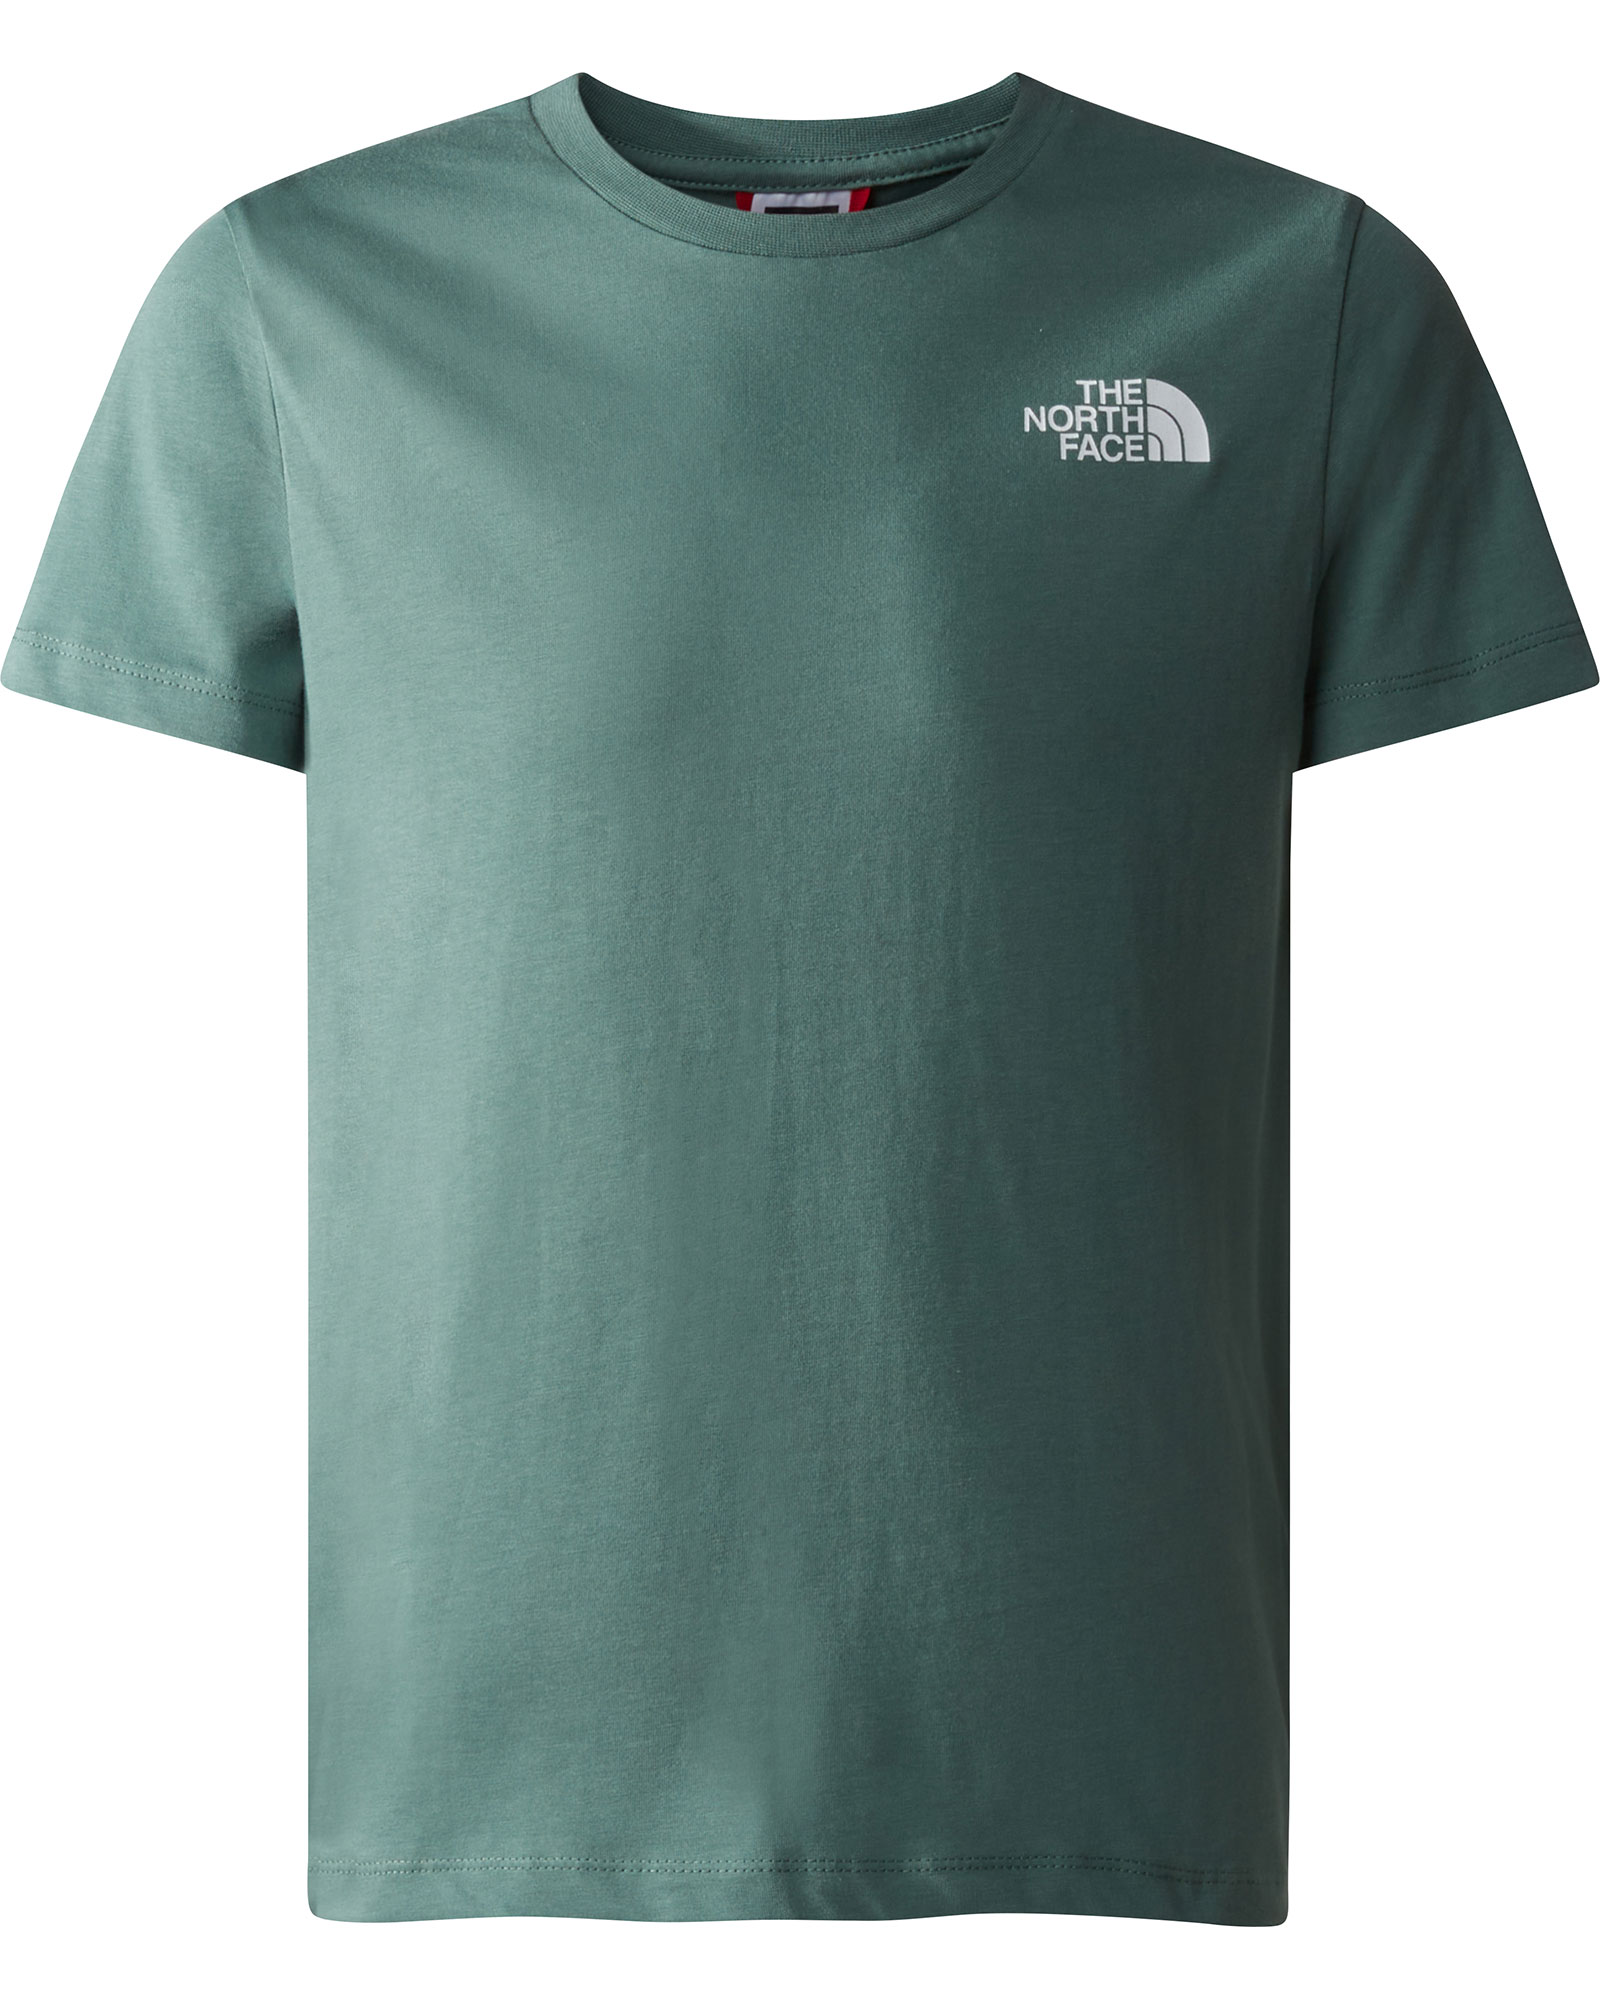 The North Face Youth Simple Dome T Shirt - Dark Sage S